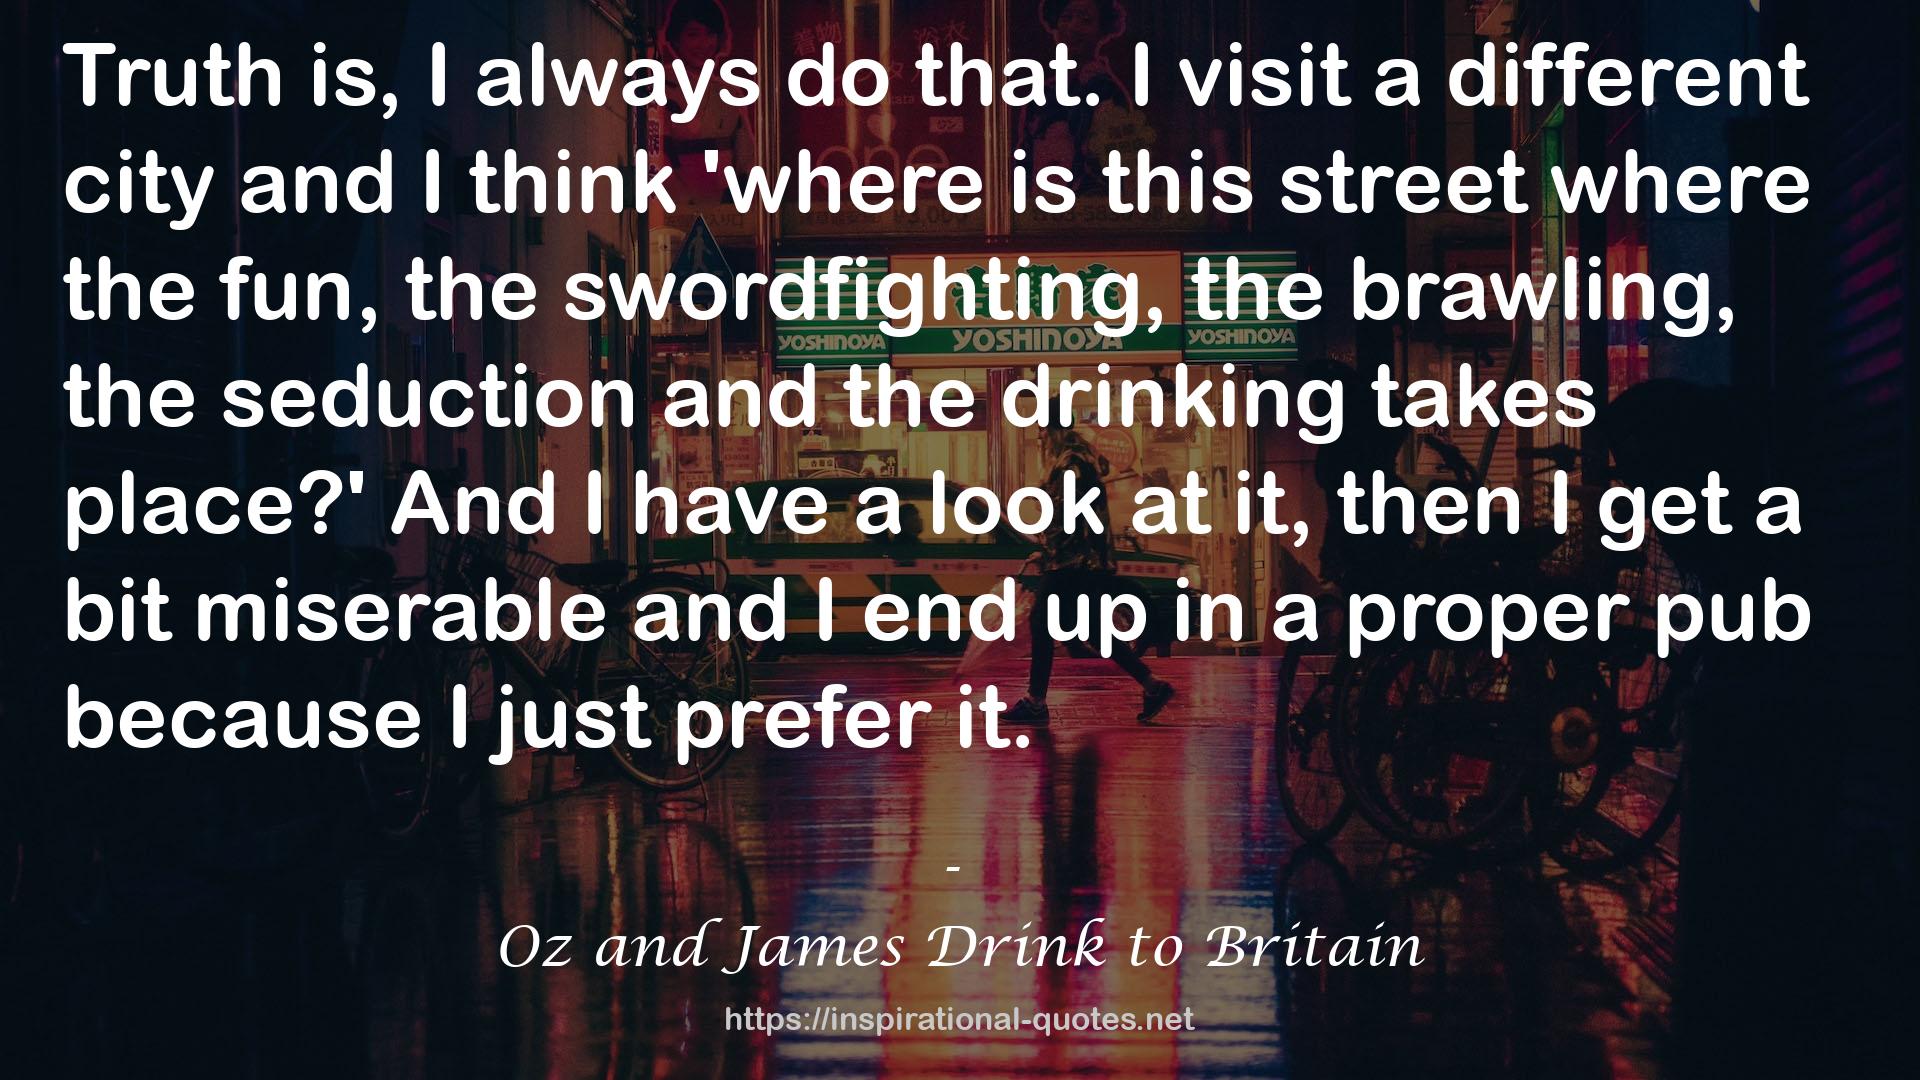 Oz and James Drink to Britain QUOTES